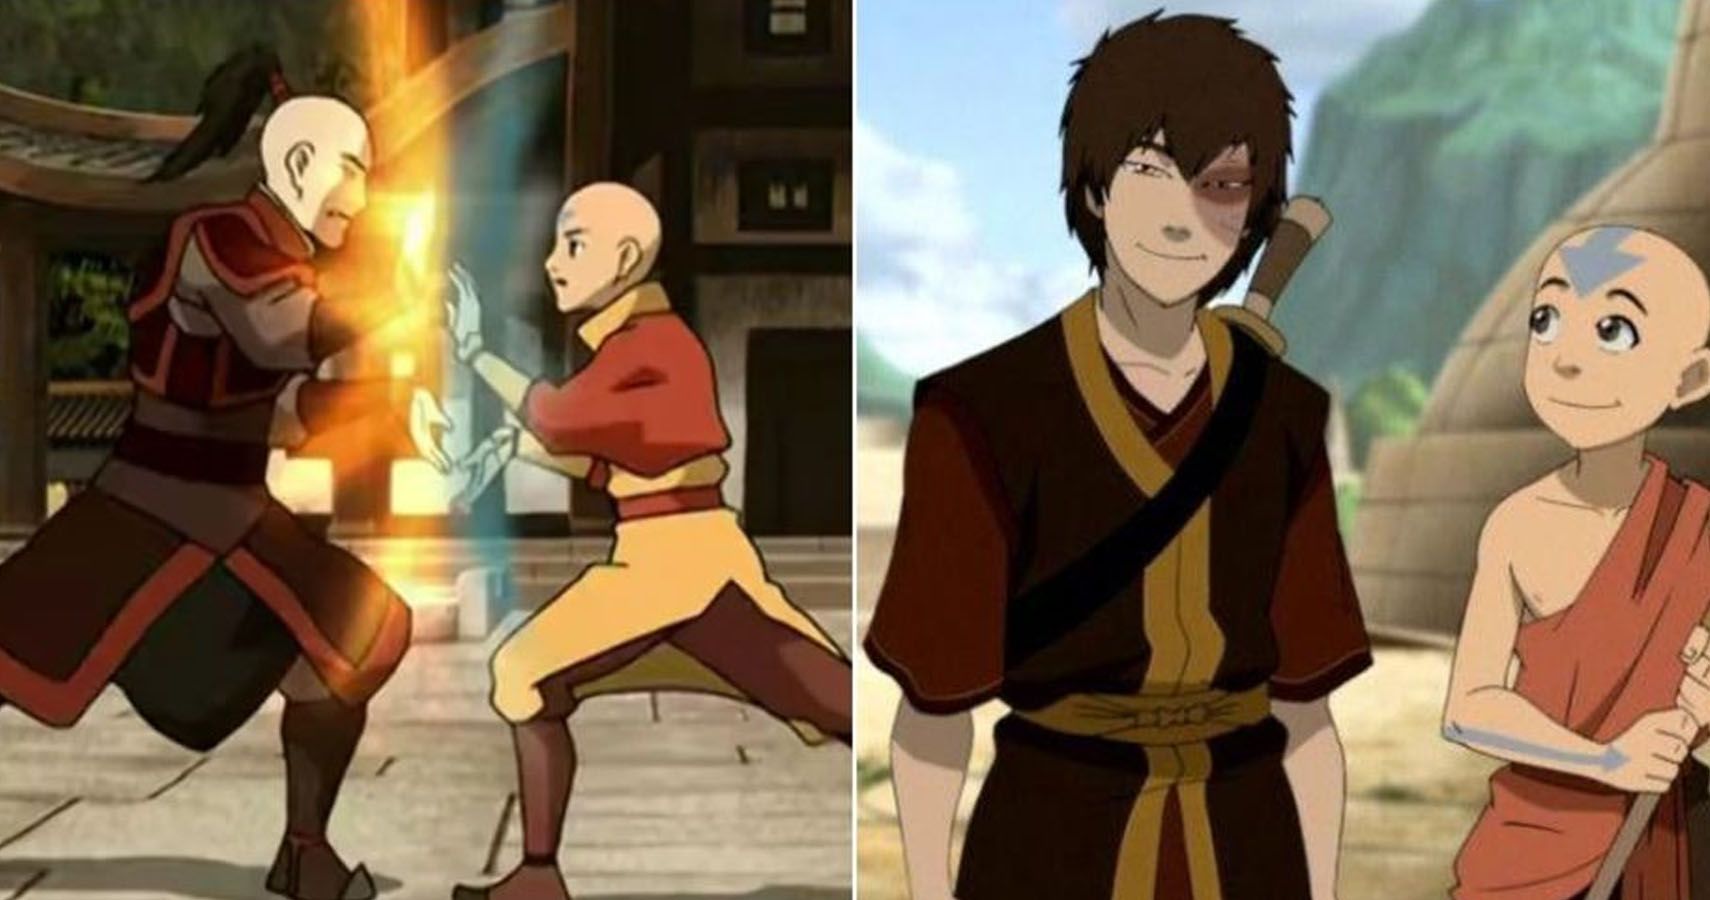 Zuko Wants to Join Team Avatar  Avatar The Last Airbender  Remember when  Zuko wanted to join Team Avatar  By Remember When  Facebook